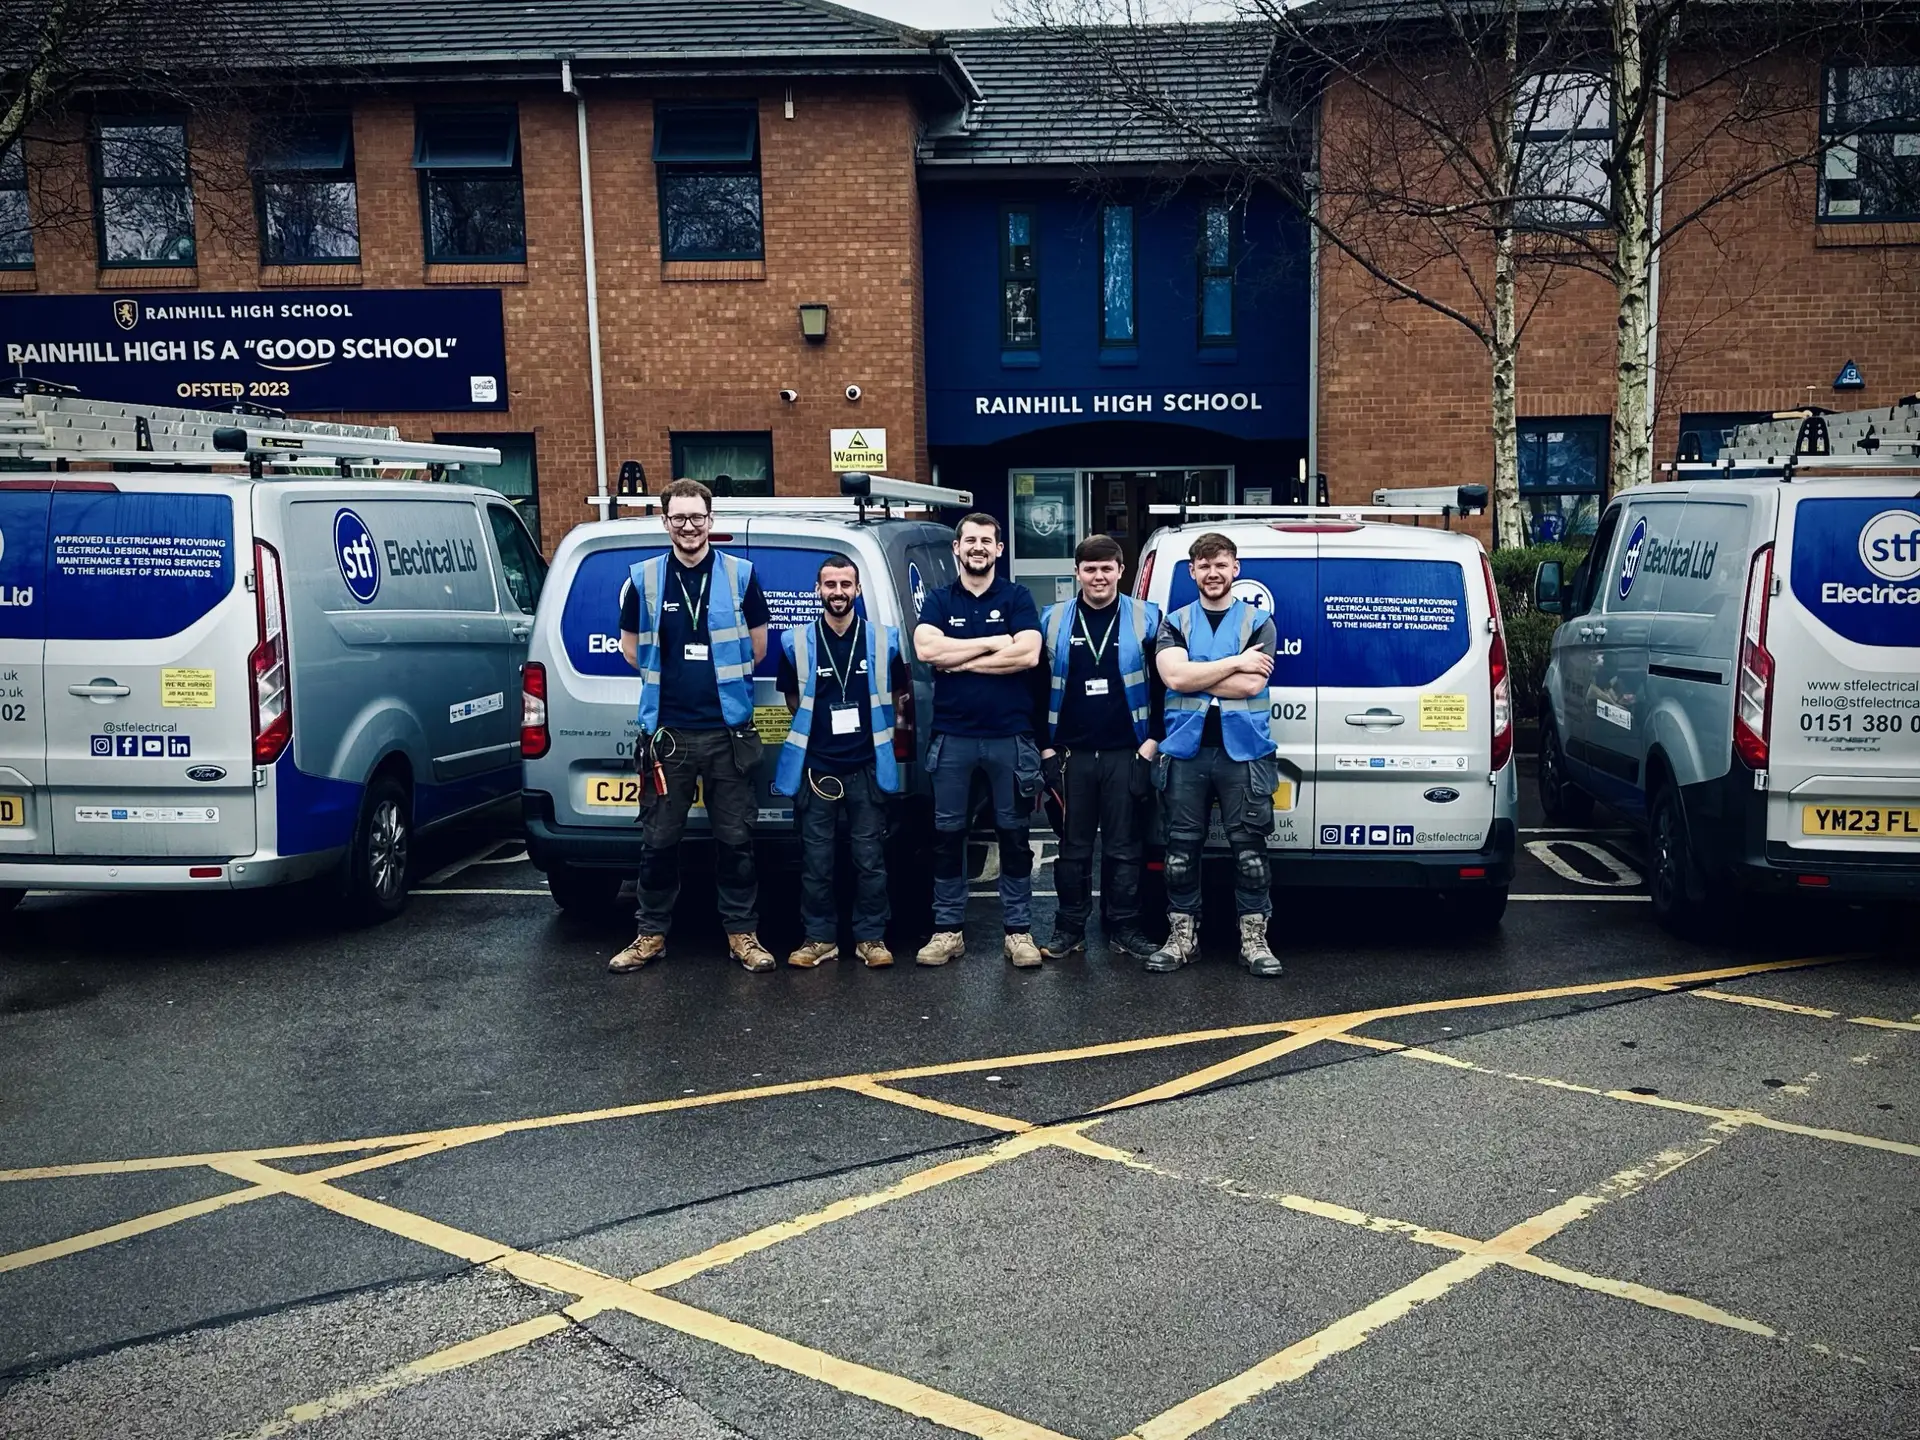 STF Electrical Ltd's dedicated on-site team of electricians working diligently to ensure quality and safety standards are met at a commercial project in Liverpool